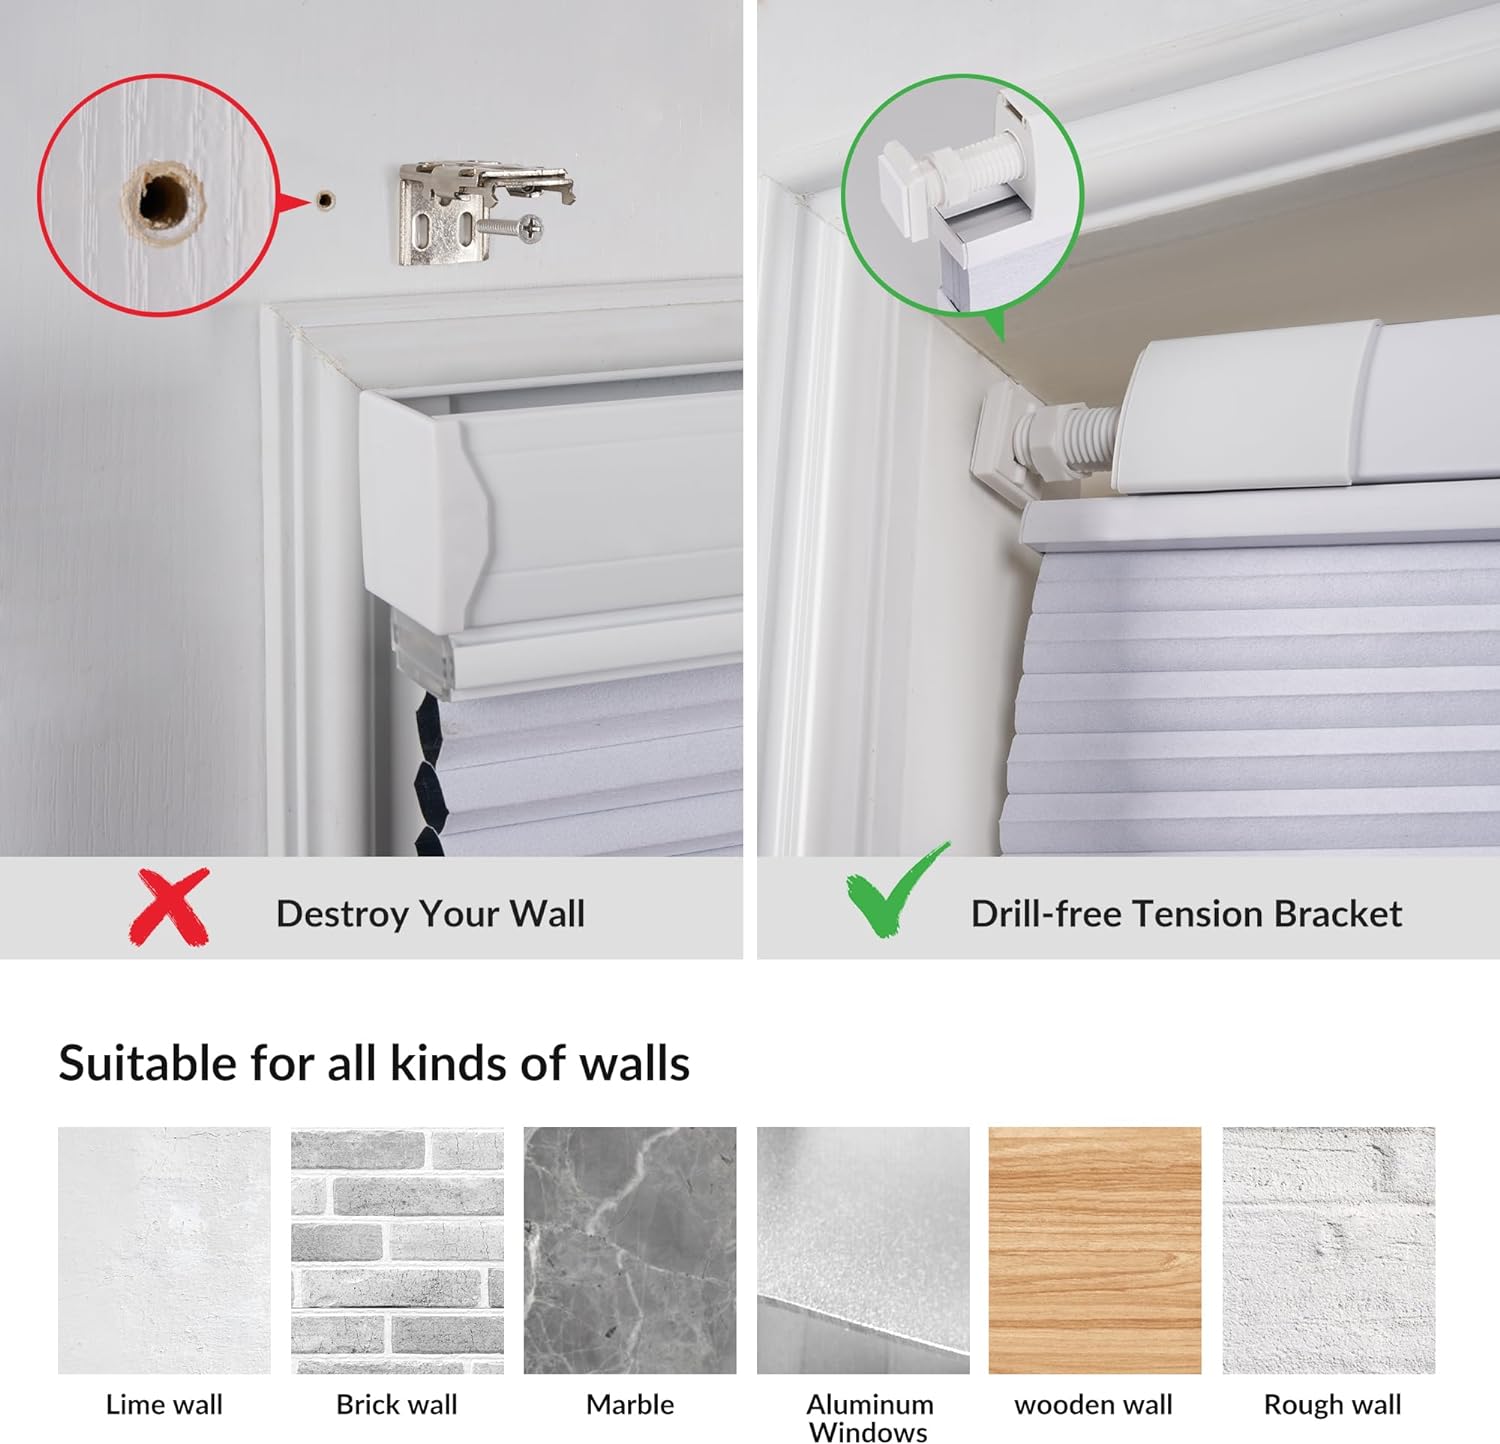 Comparison of traditional drill installation versus drill-free tension bracket for window blinds, demonstrating non-damaging mount suitable for various wall types including lime, brick, marble, aluminum, wood, and rough textures